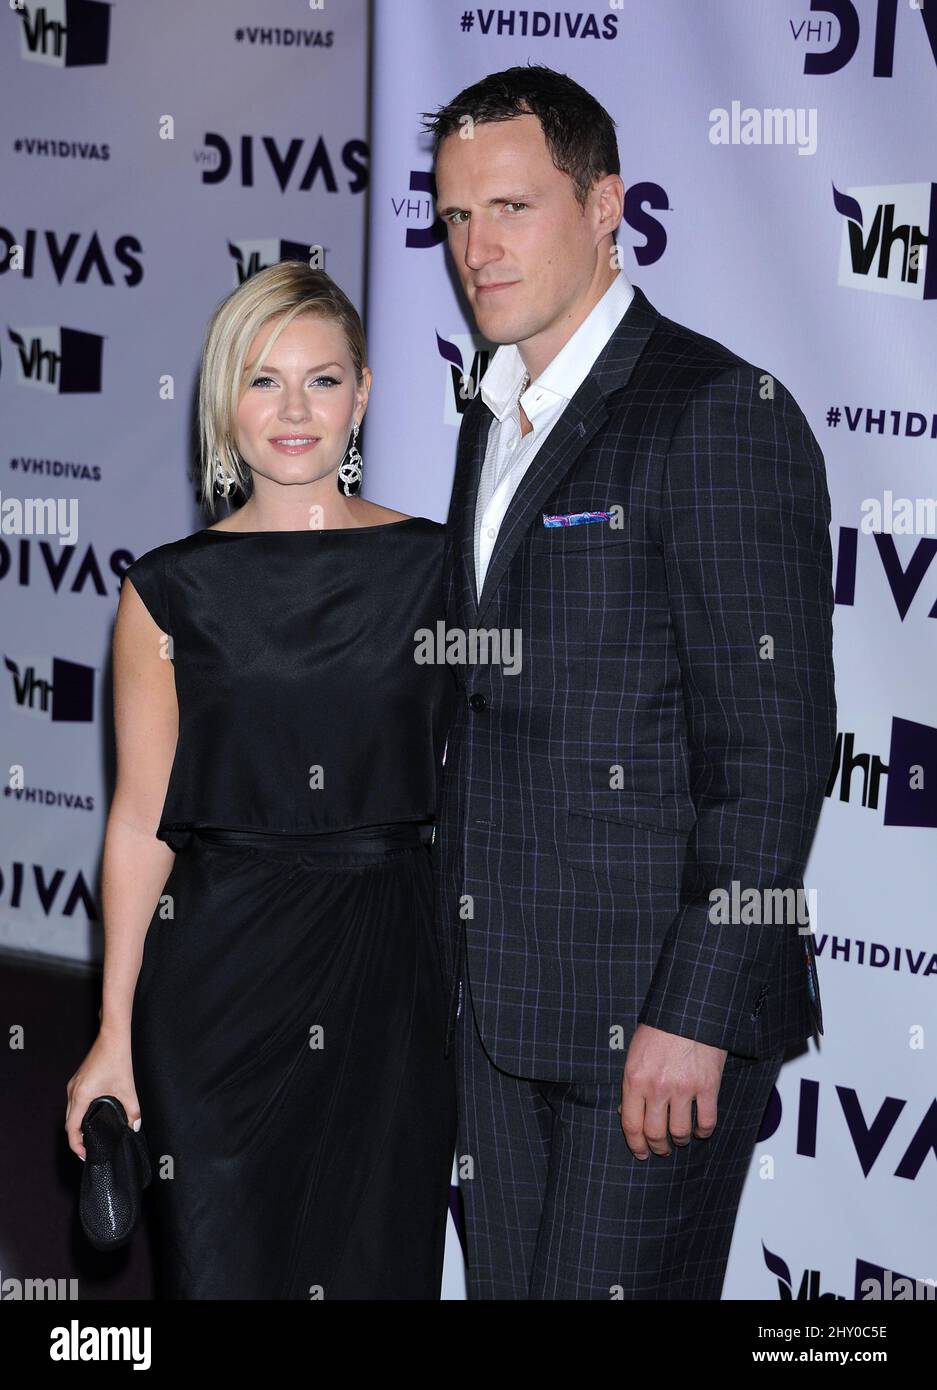 2012/09/04 - Elisha Cuthbert and Dion Phaneuf's Engagement 